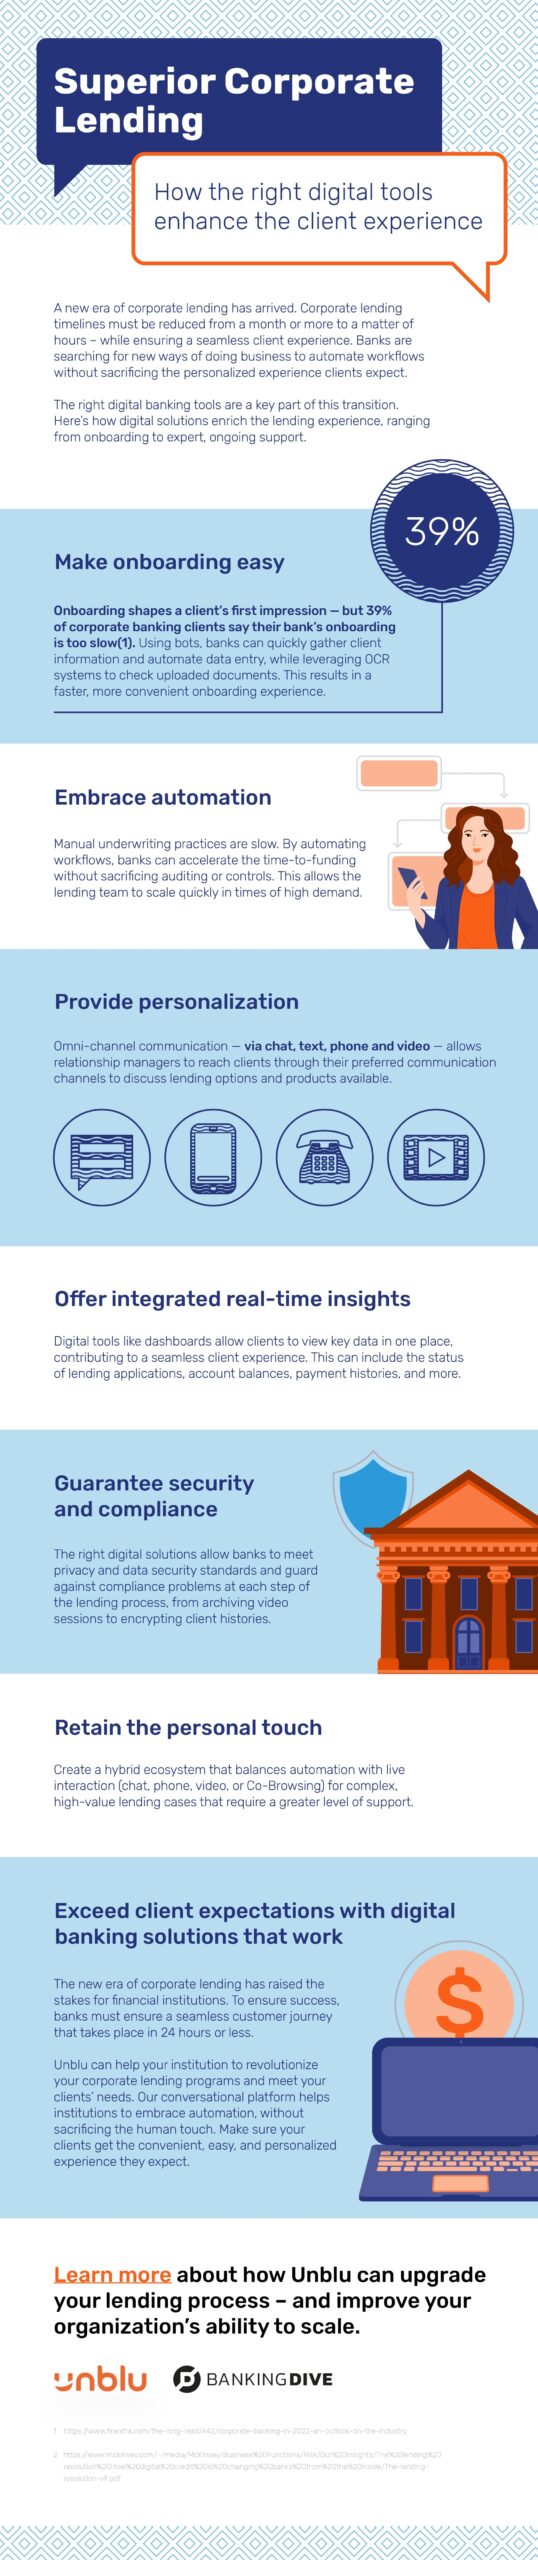 Digital corporate banking infographic